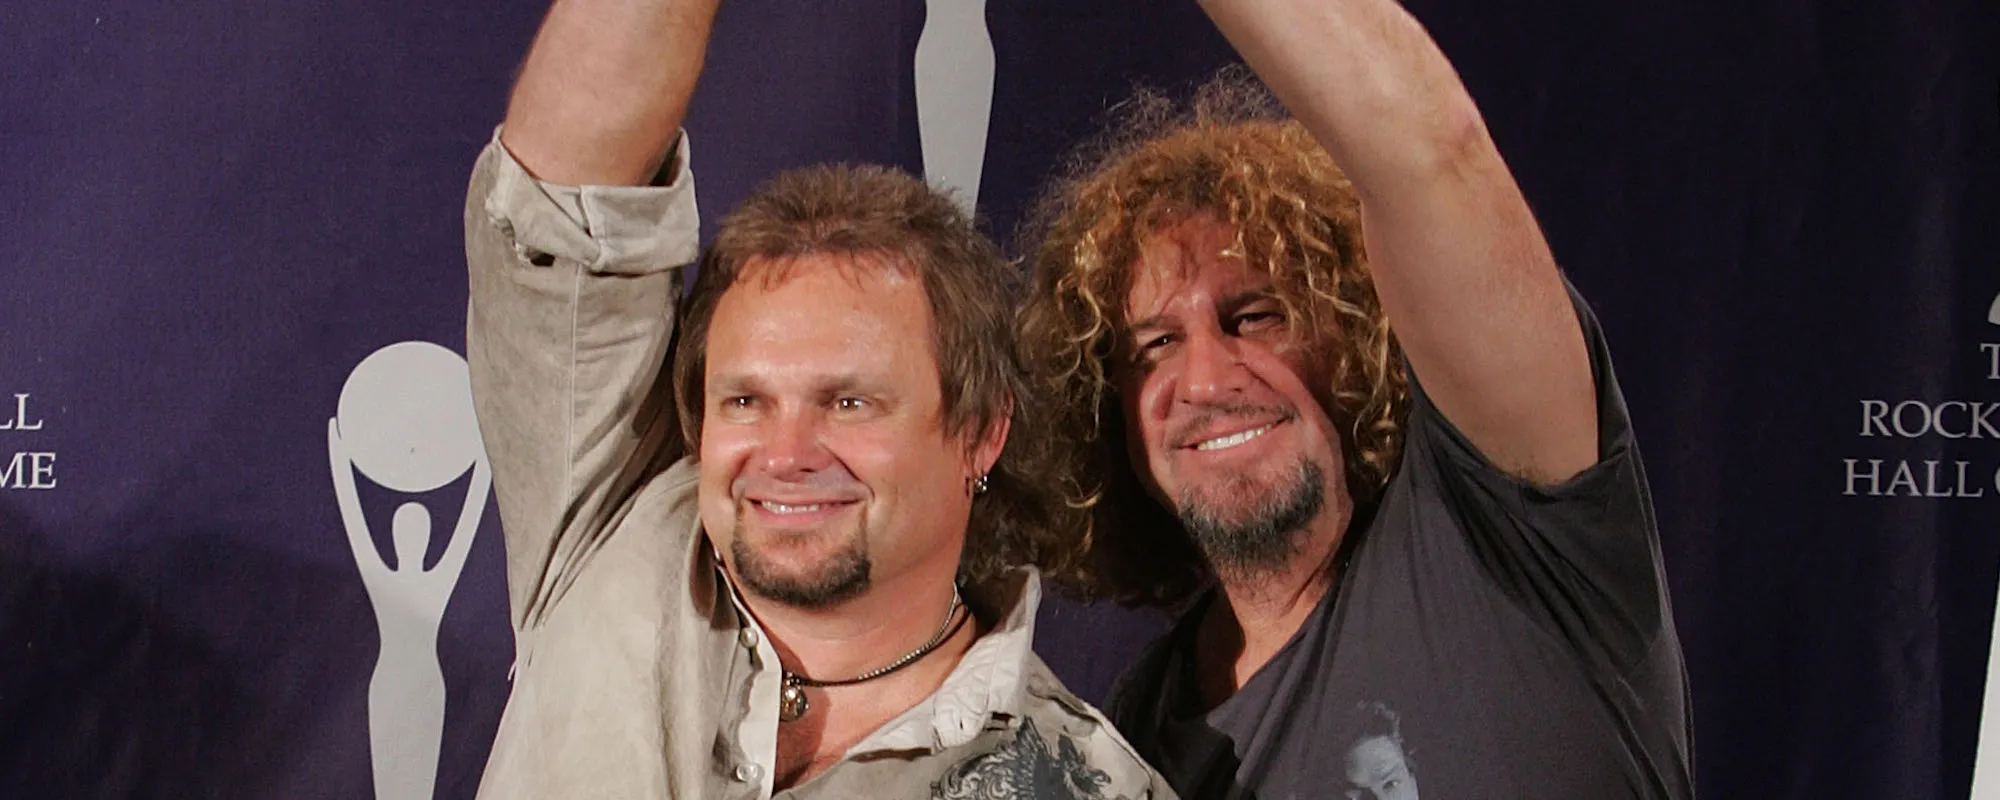 The Meaning Behind Van Halen’s First Single with Then-“New” Singer Sammy Hagar, “Why Can’t This Be Love”